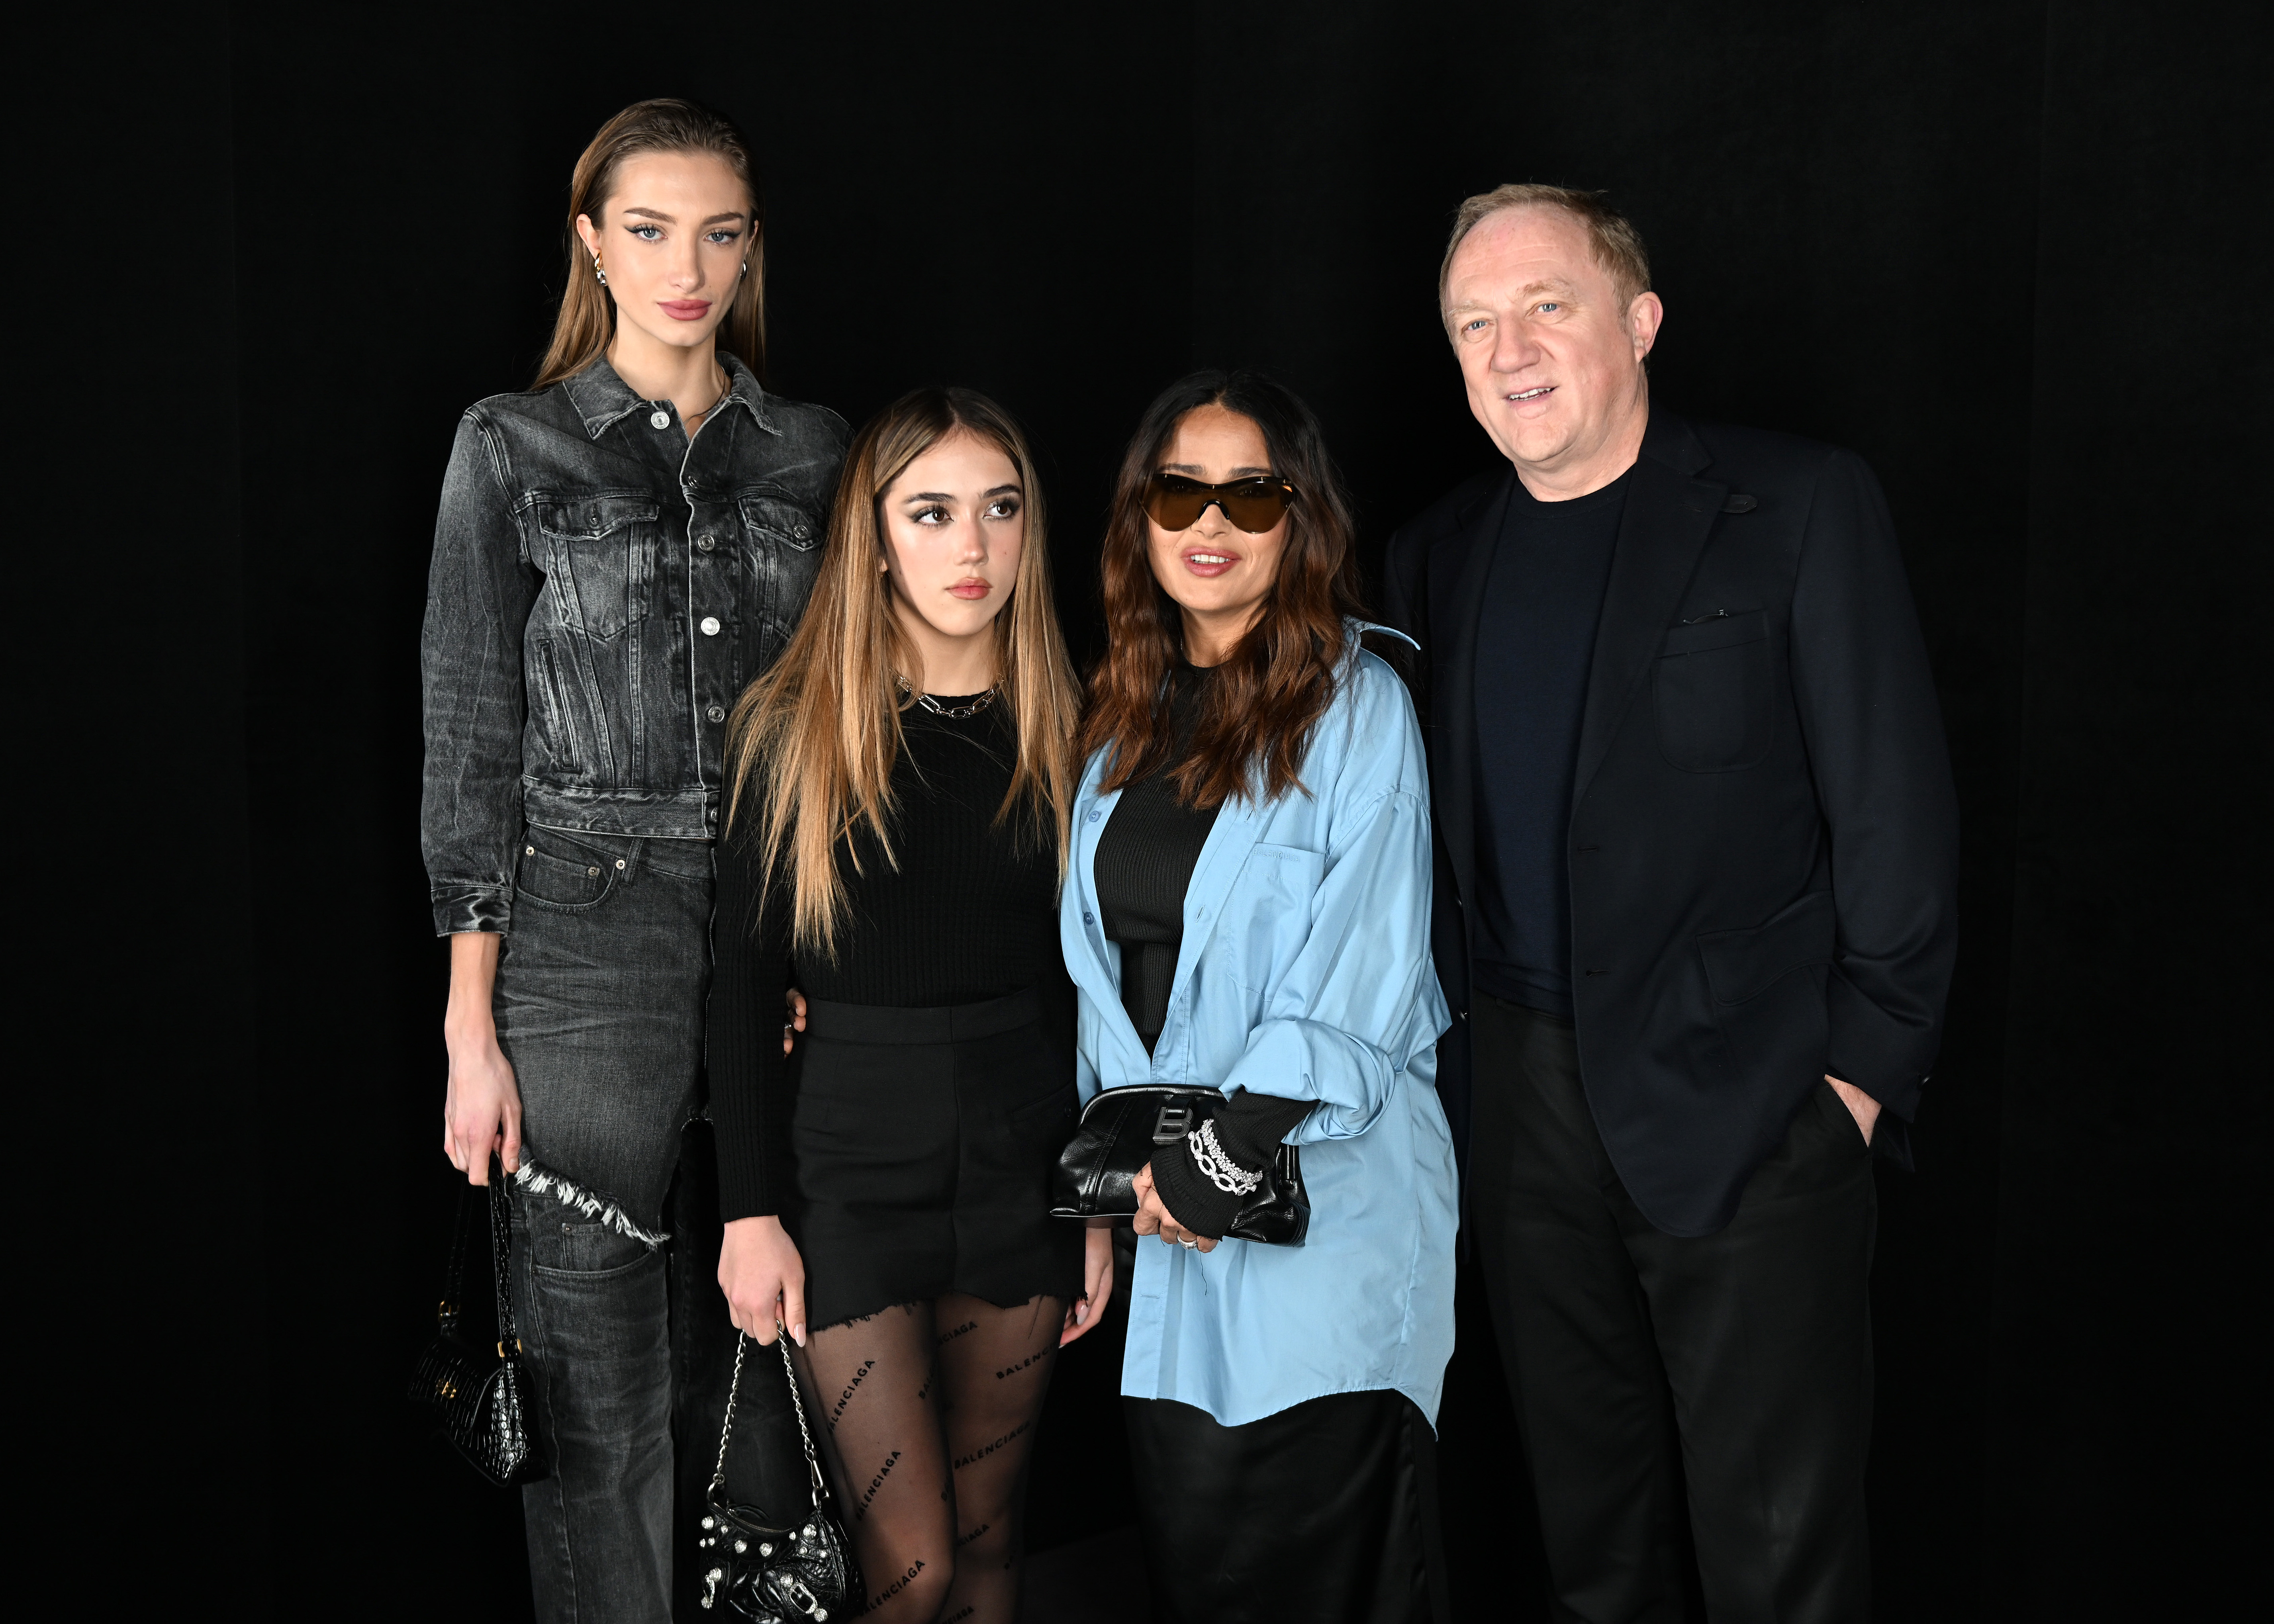 Mathilde Pinault, Valentina Paloma Pinault, Salma Hayek, and François-Henri Pinault attend the Balenciaga FW 22 show on March 06, 2022 in Le Bourget, France | Source: Getty Images